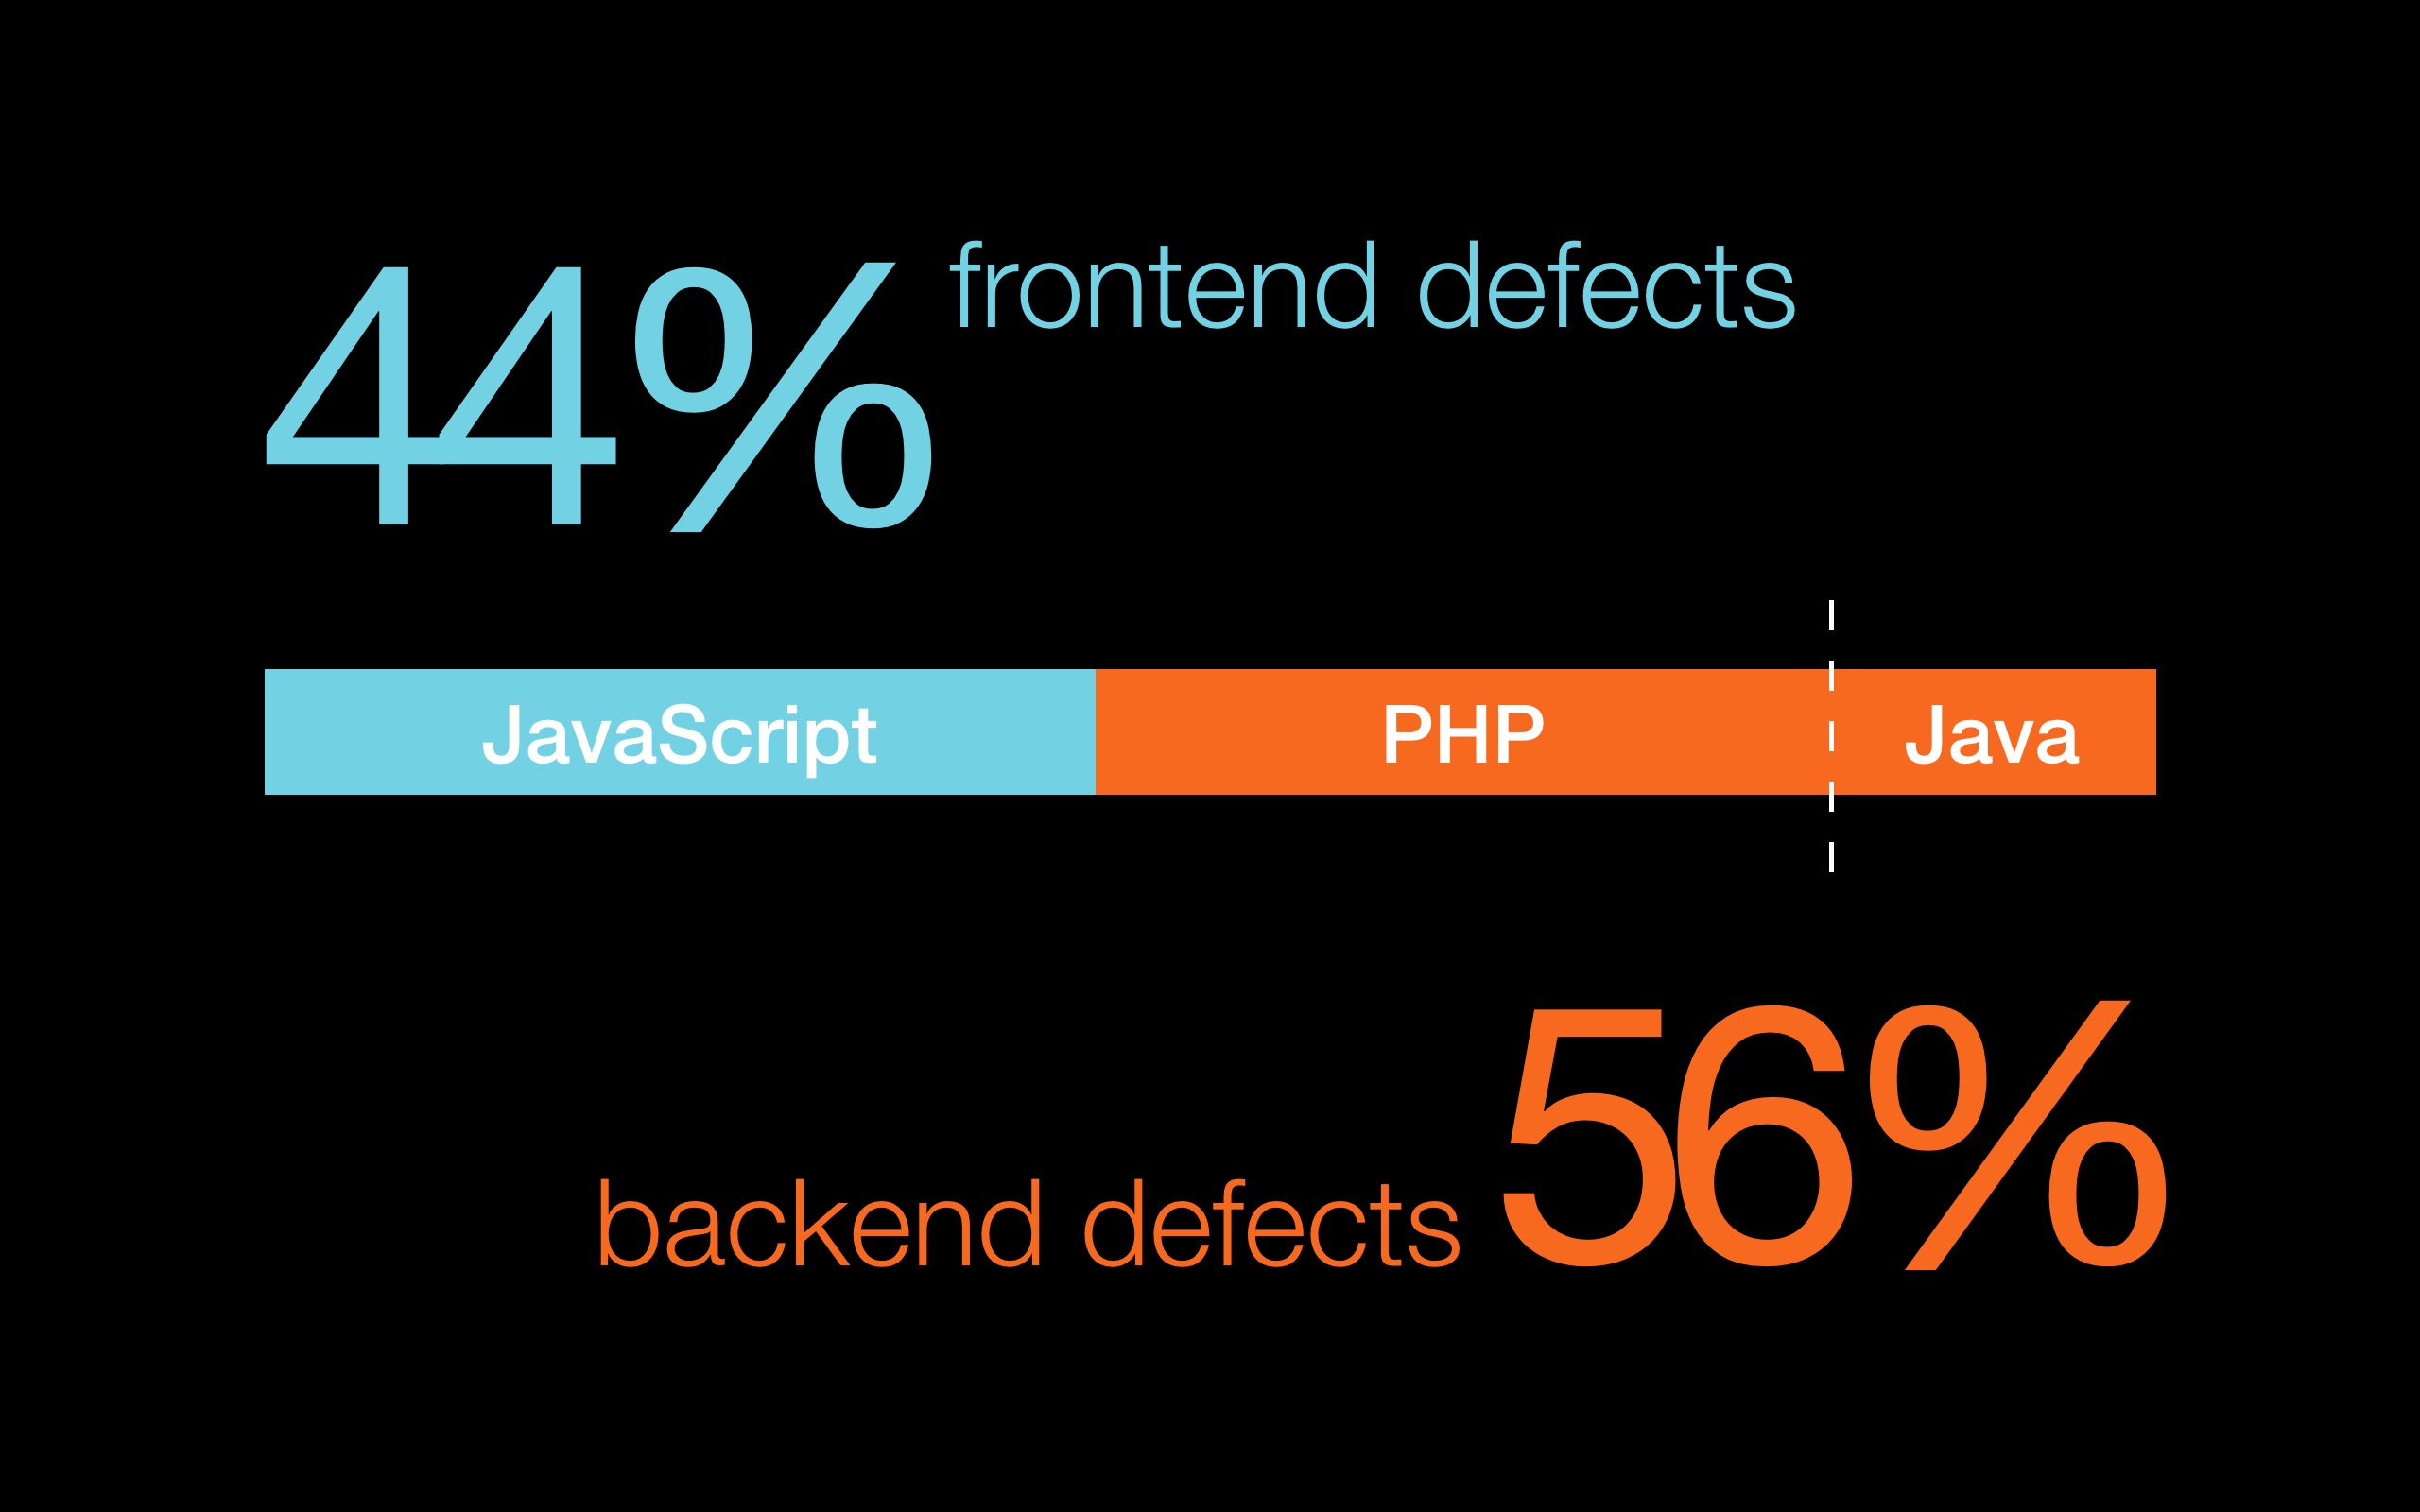 Equal share of front and backend defects